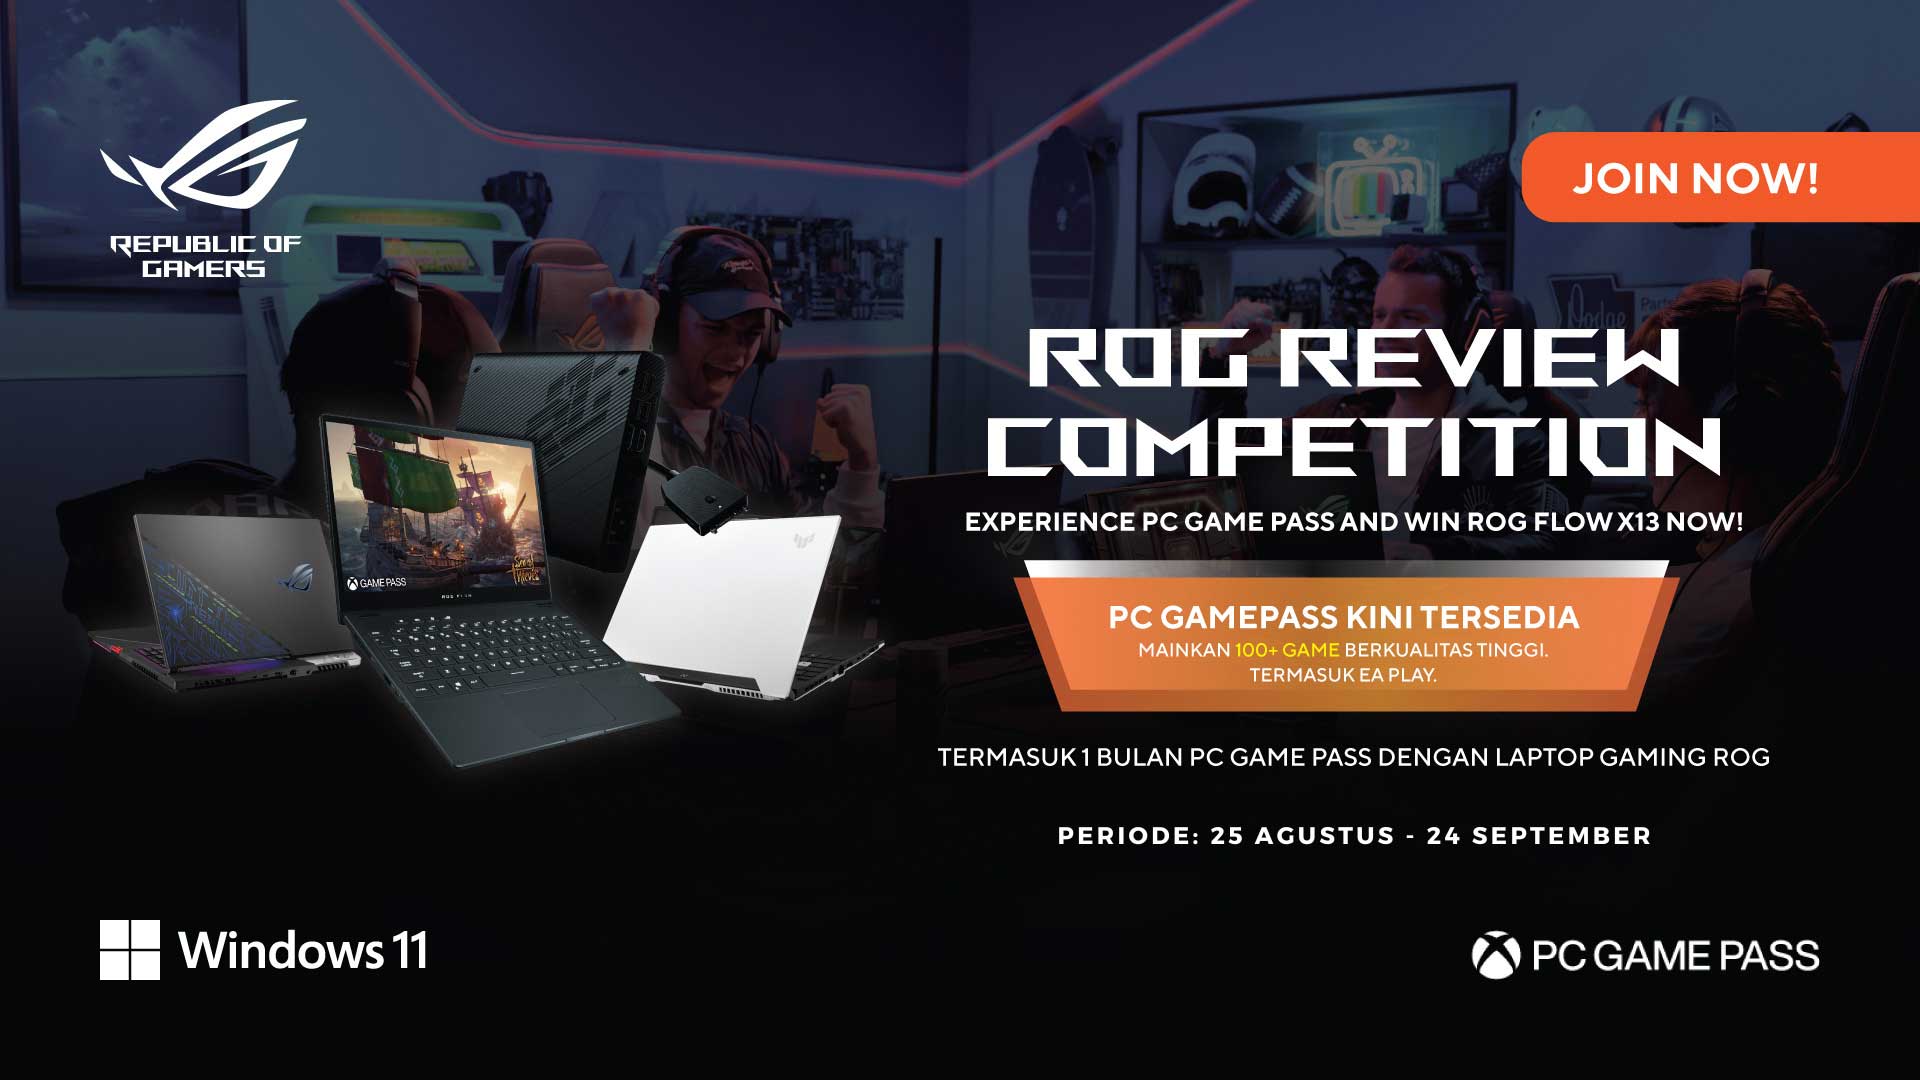 ROG Review Competition!